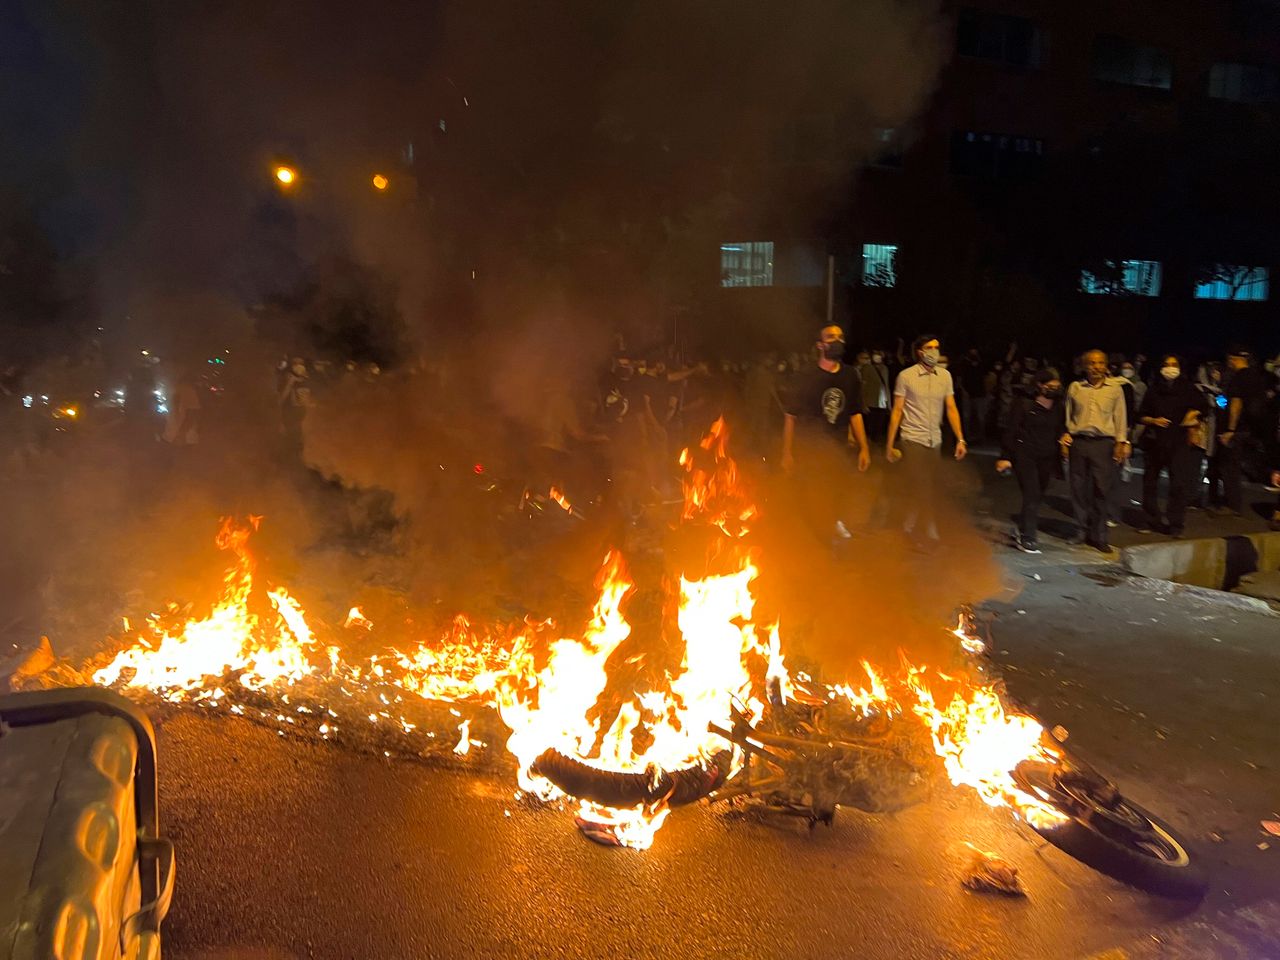 In this Monday, Sept. 19, photo taken by an individual not employed by The Associated Press and obtained by the AP outside Iran, a police motorcycle burns during a protest over the death of a young woman who had been detained for violating the country's conservative dress code, in downtown Tehran.